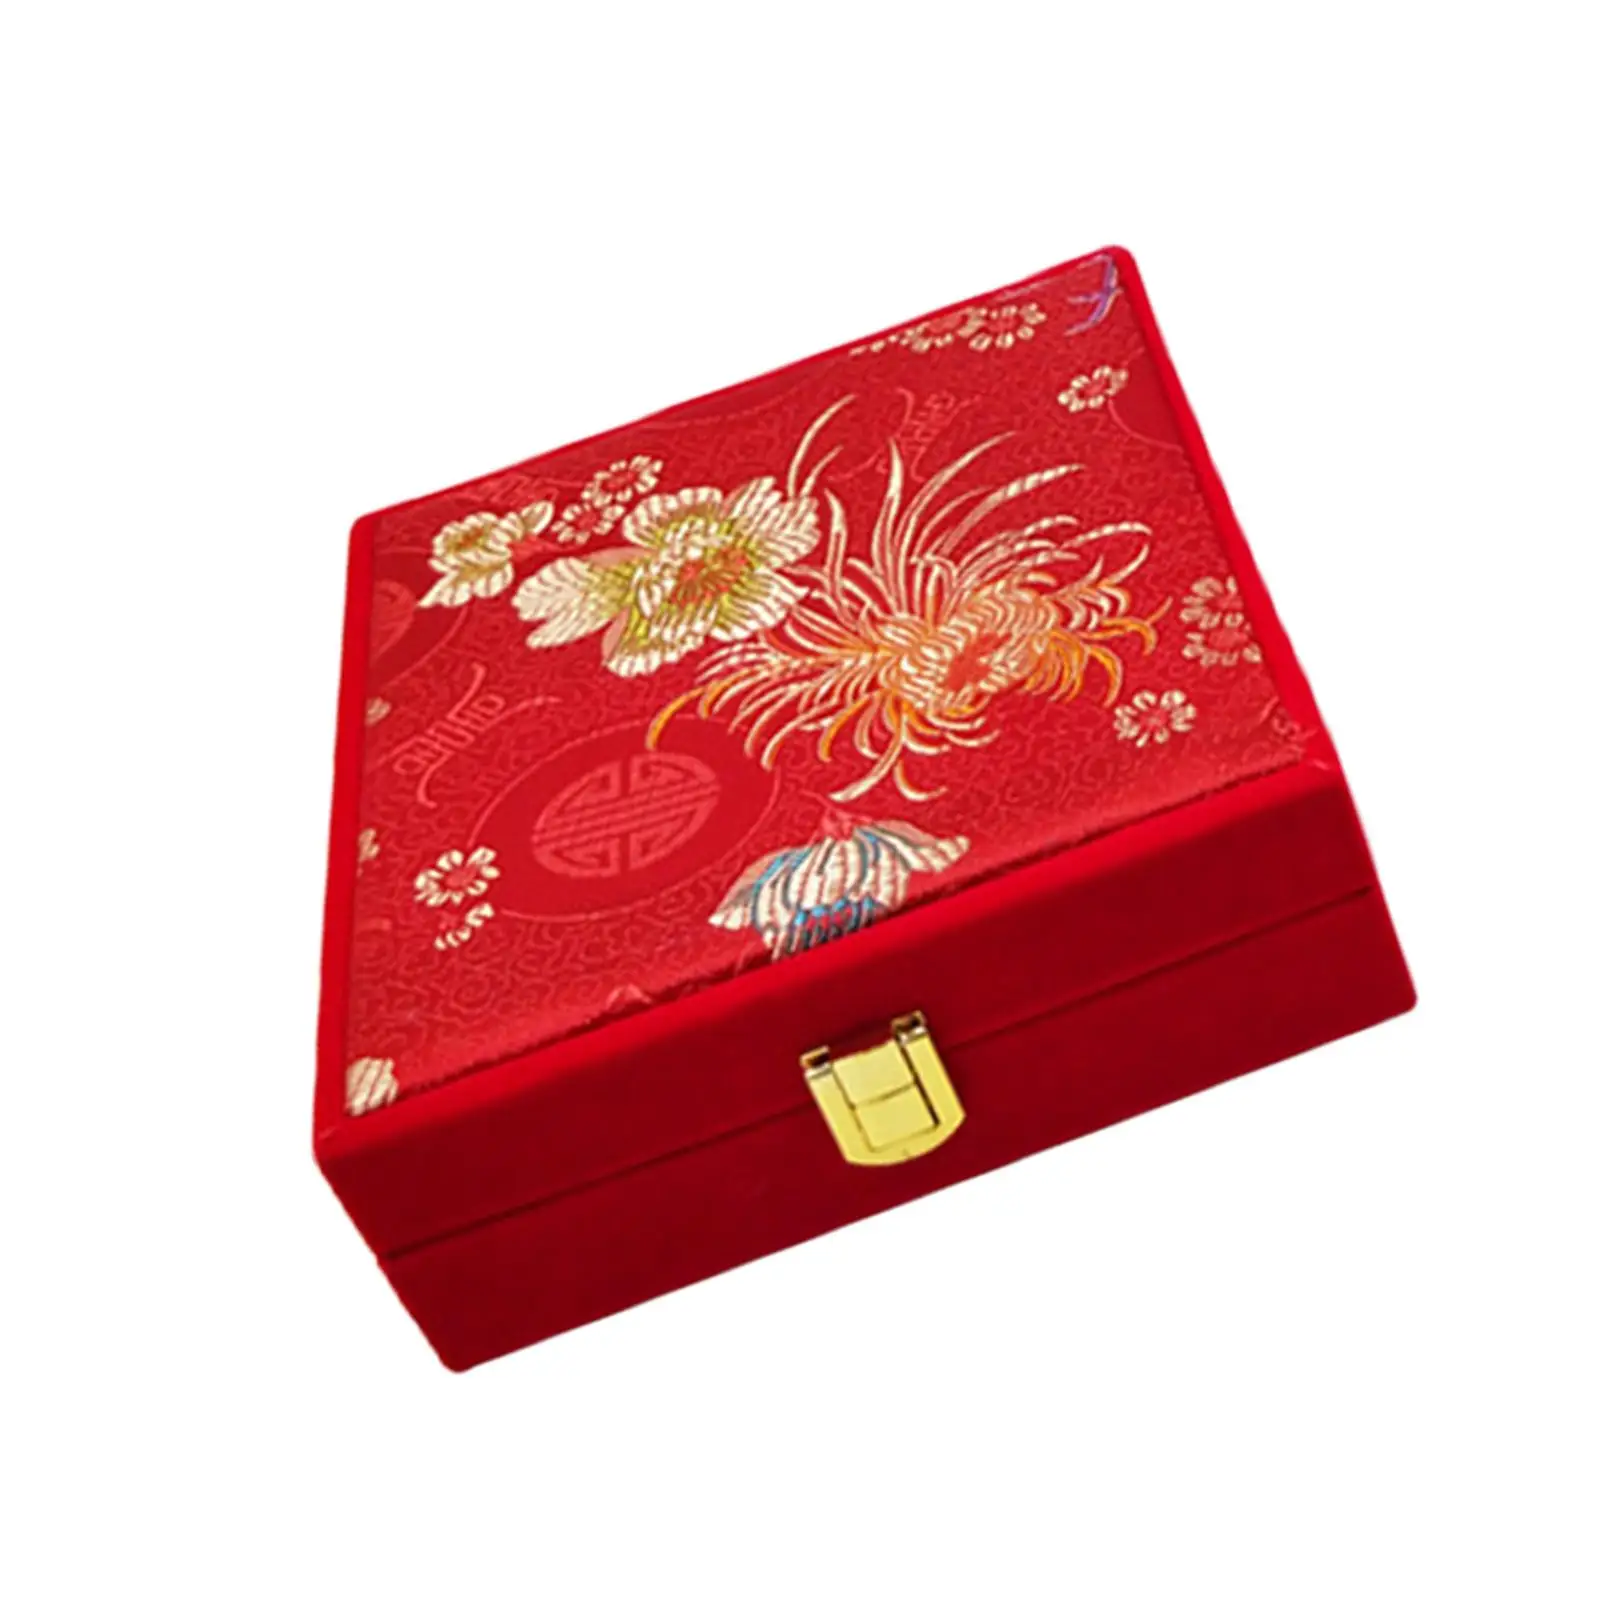 Multi Purpose Jewelry Display Box Bracelet Earrings Velvet Chinese Style Showcase Container Gift Box Storage Case for Wedding